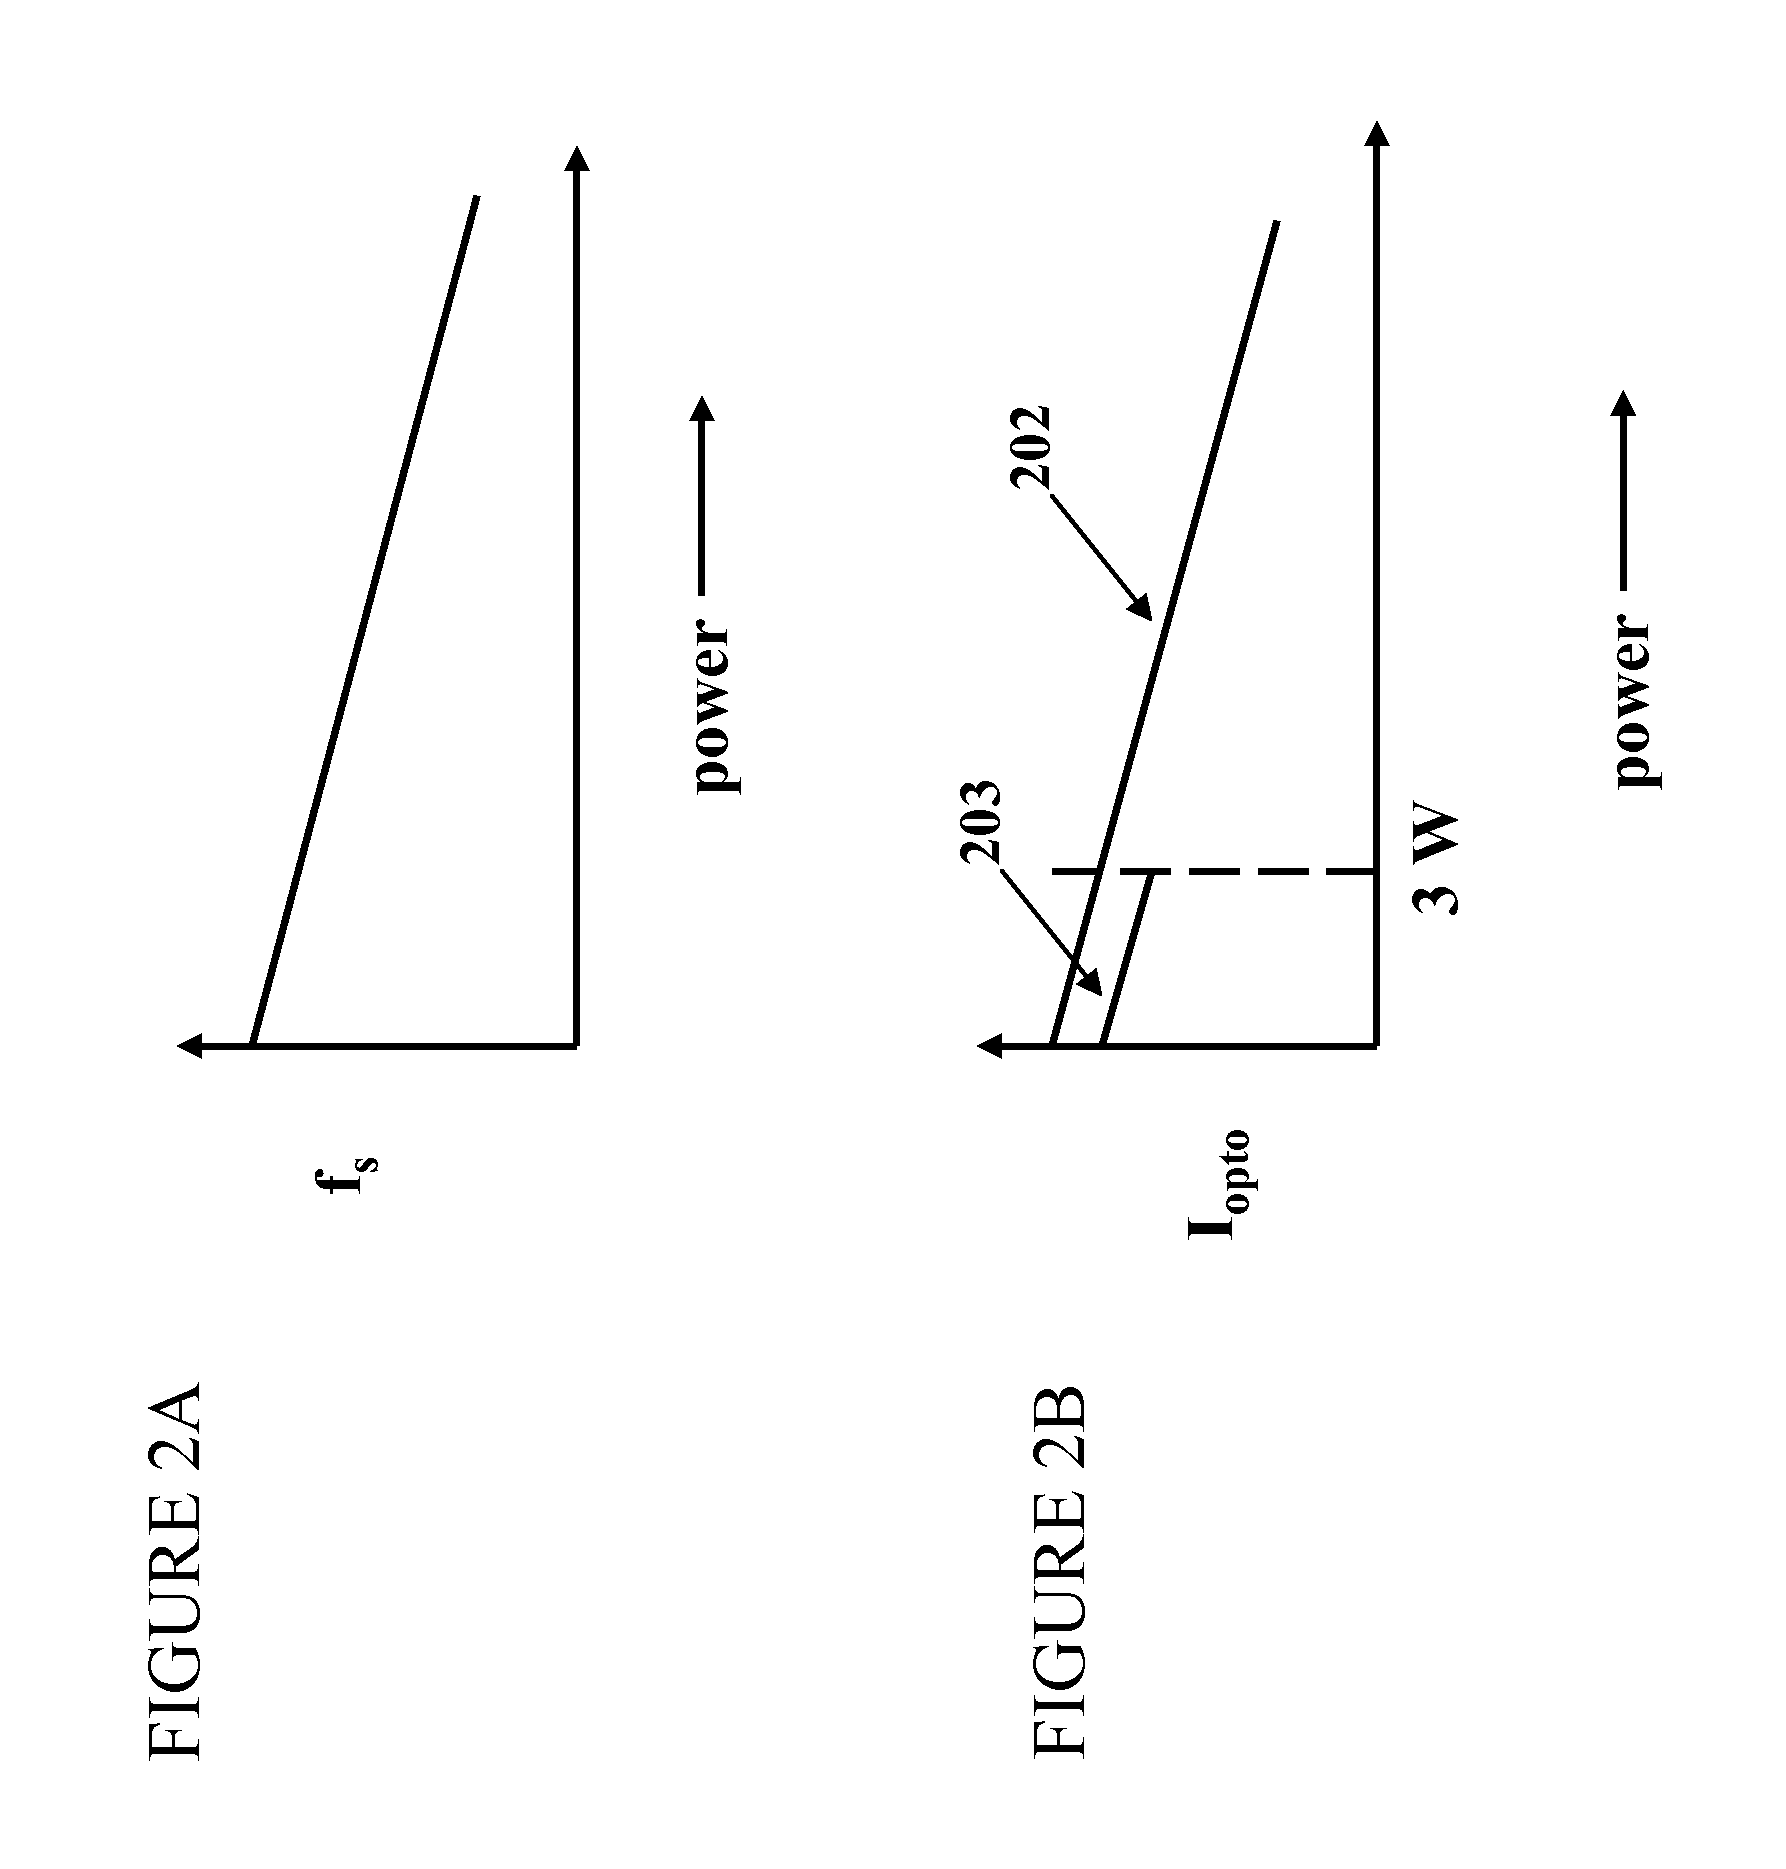 Control System for a Power Converter and Method of Operating the Same